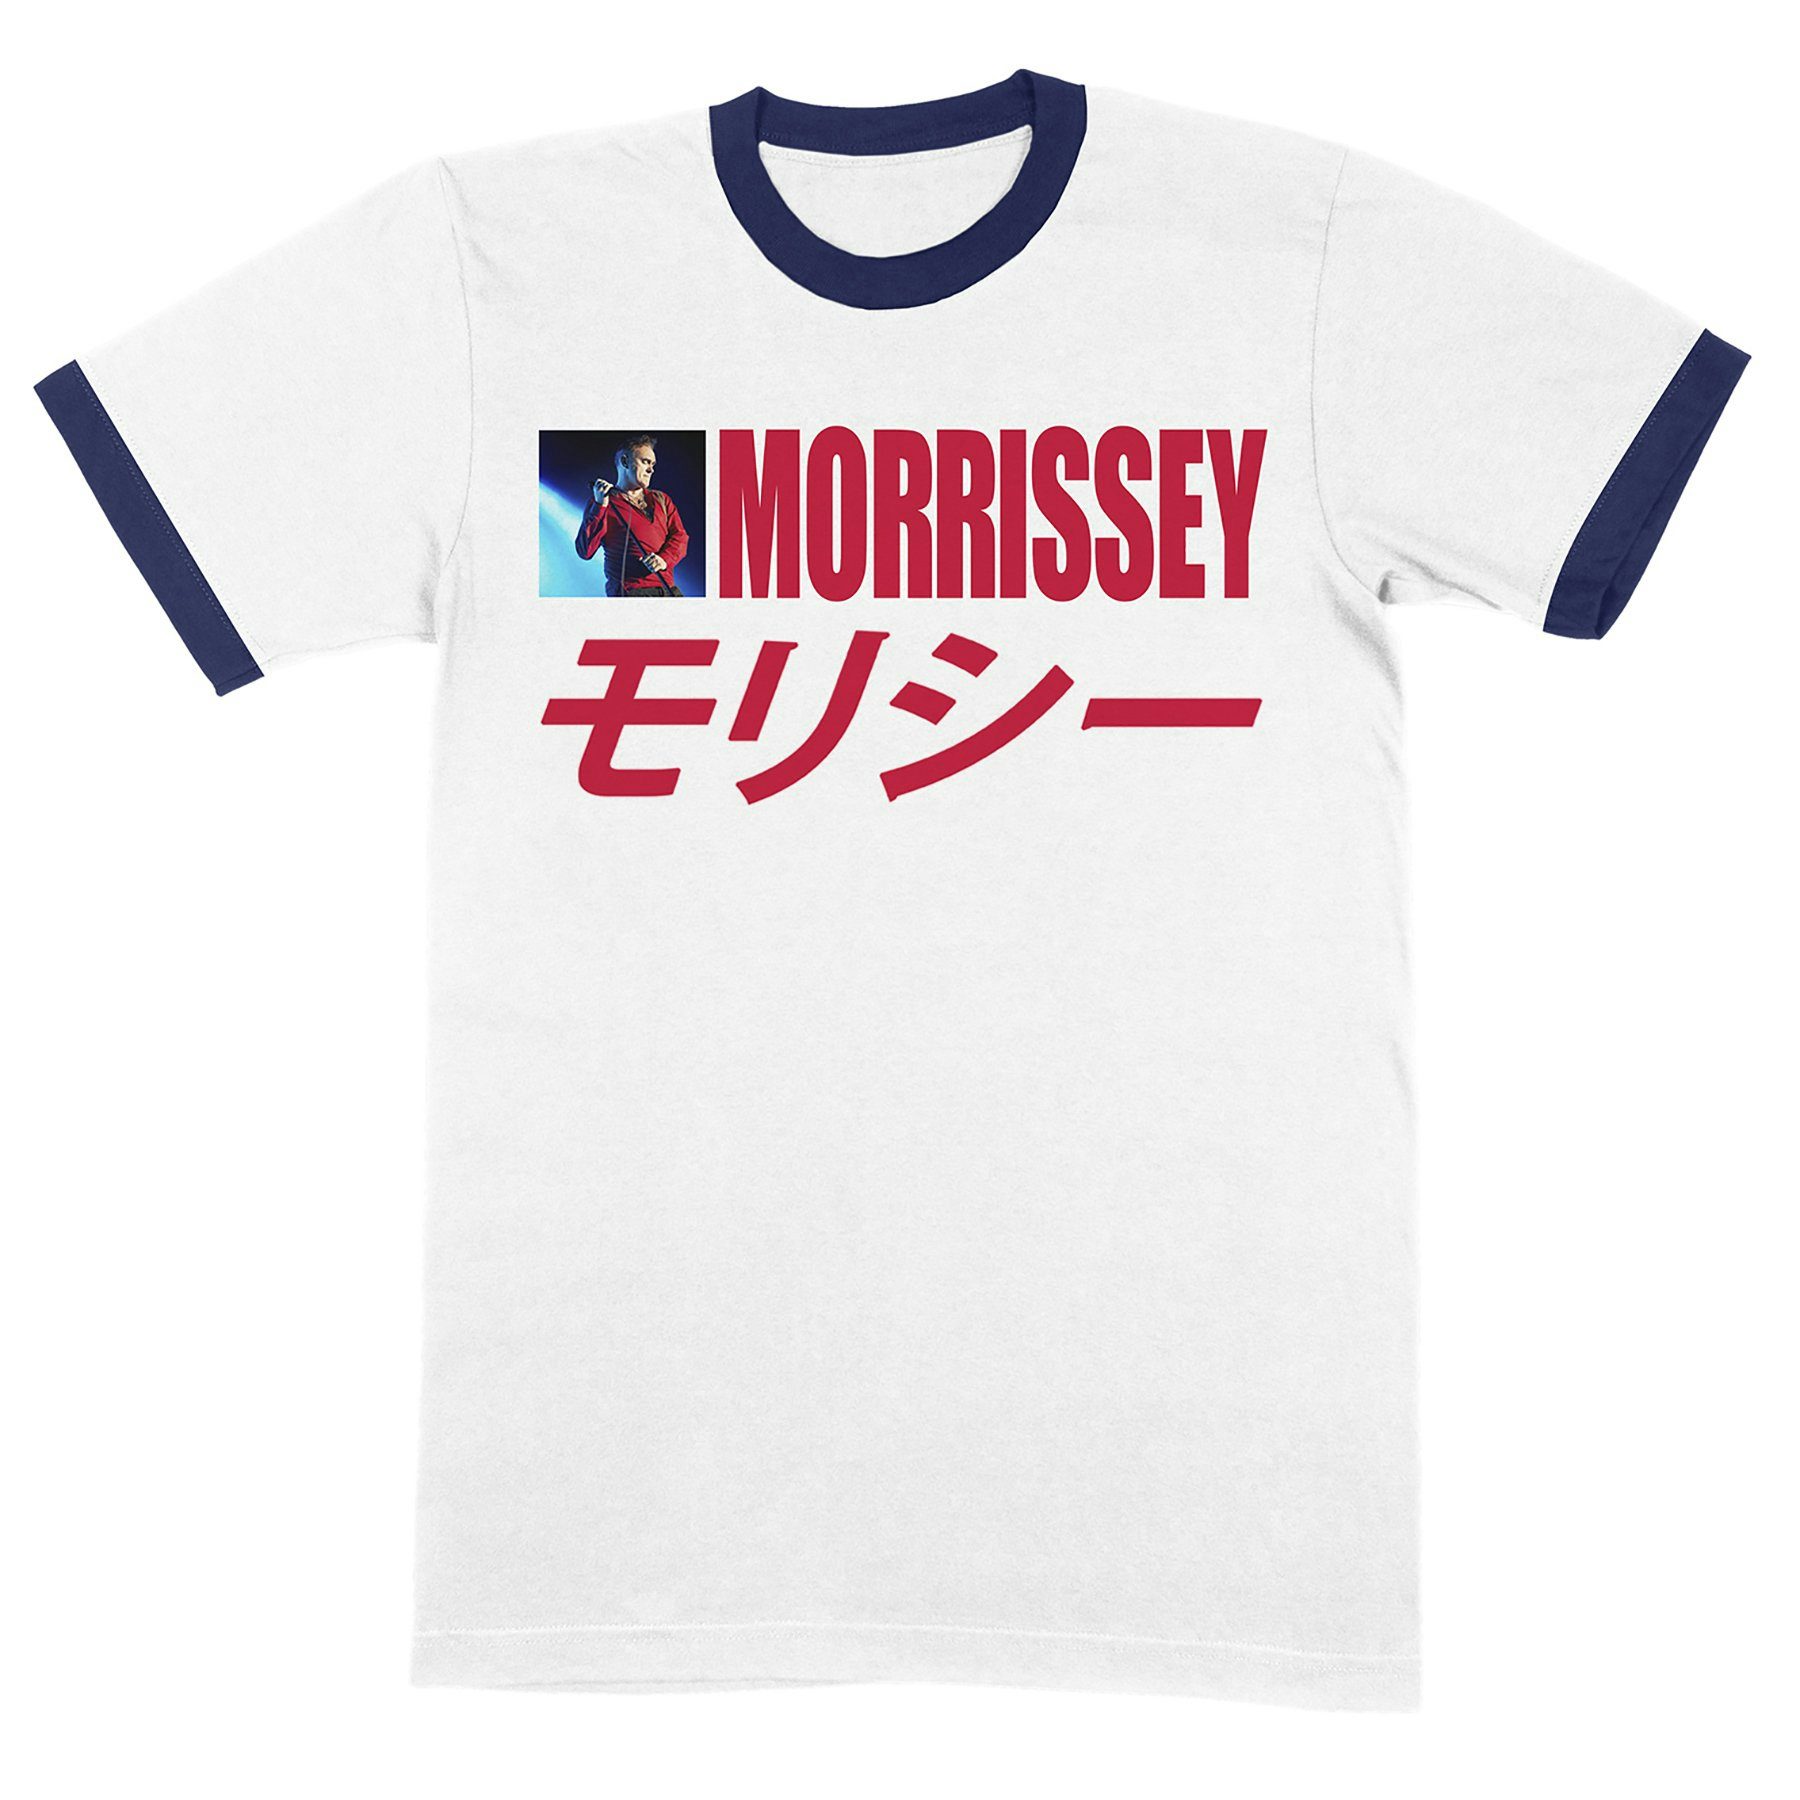 NEW & OFFICIAL! Morrissey 'Stop Watching The News' T-Shirt 